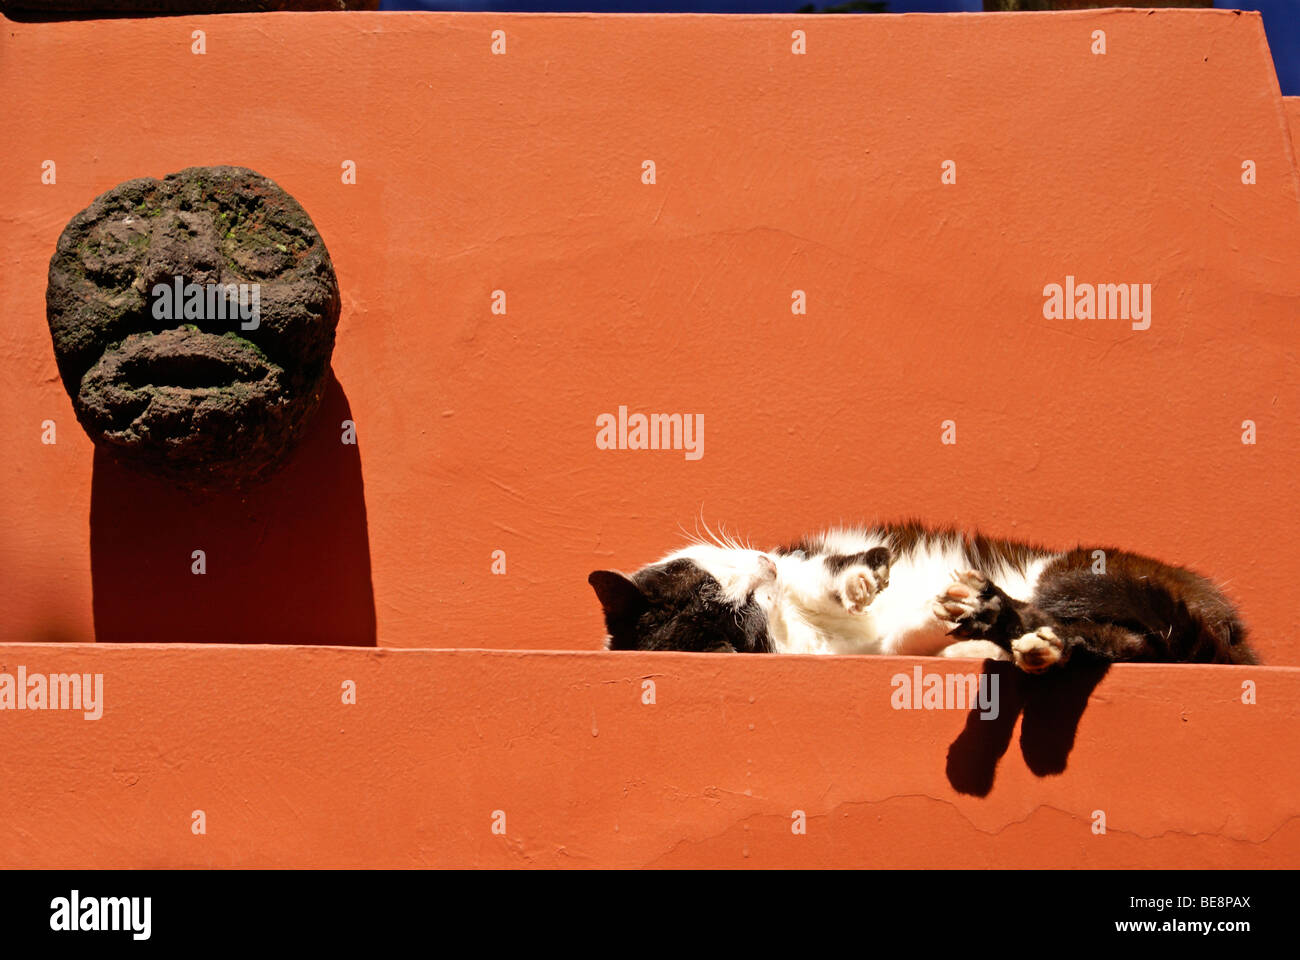 Sleeping cat at the Museo Frida Kahlo, also known as the Casa Azul, or Blue house, Coyoacan, Mexico City Stock Photo